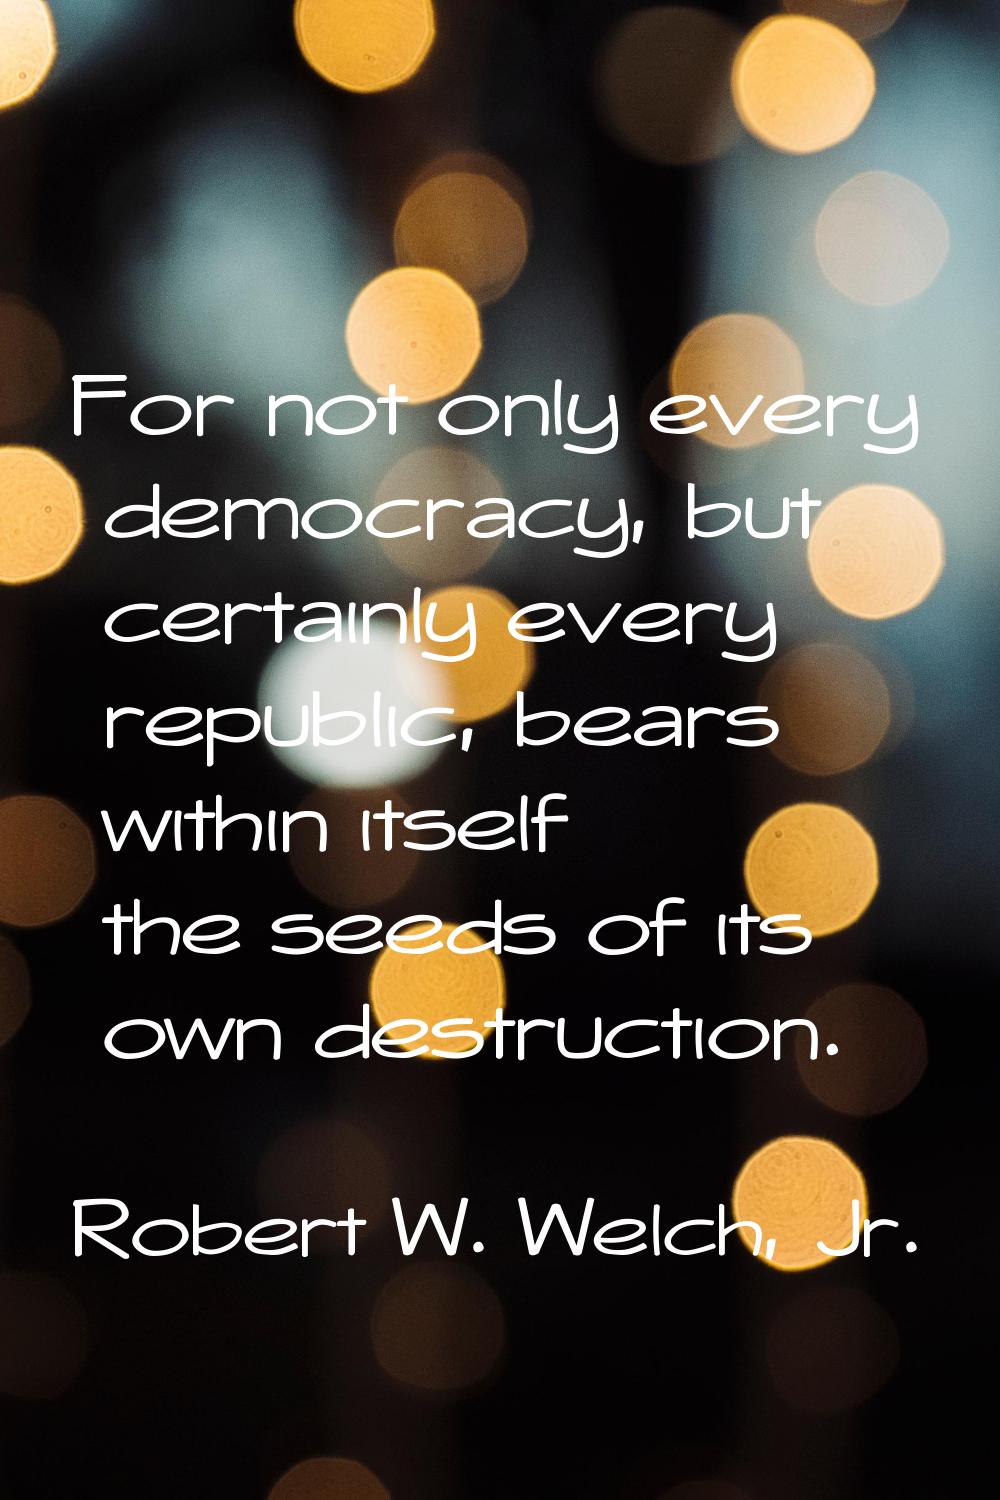 For not only every democracy, but certainly every republic, bears within itself the seeds of its ow